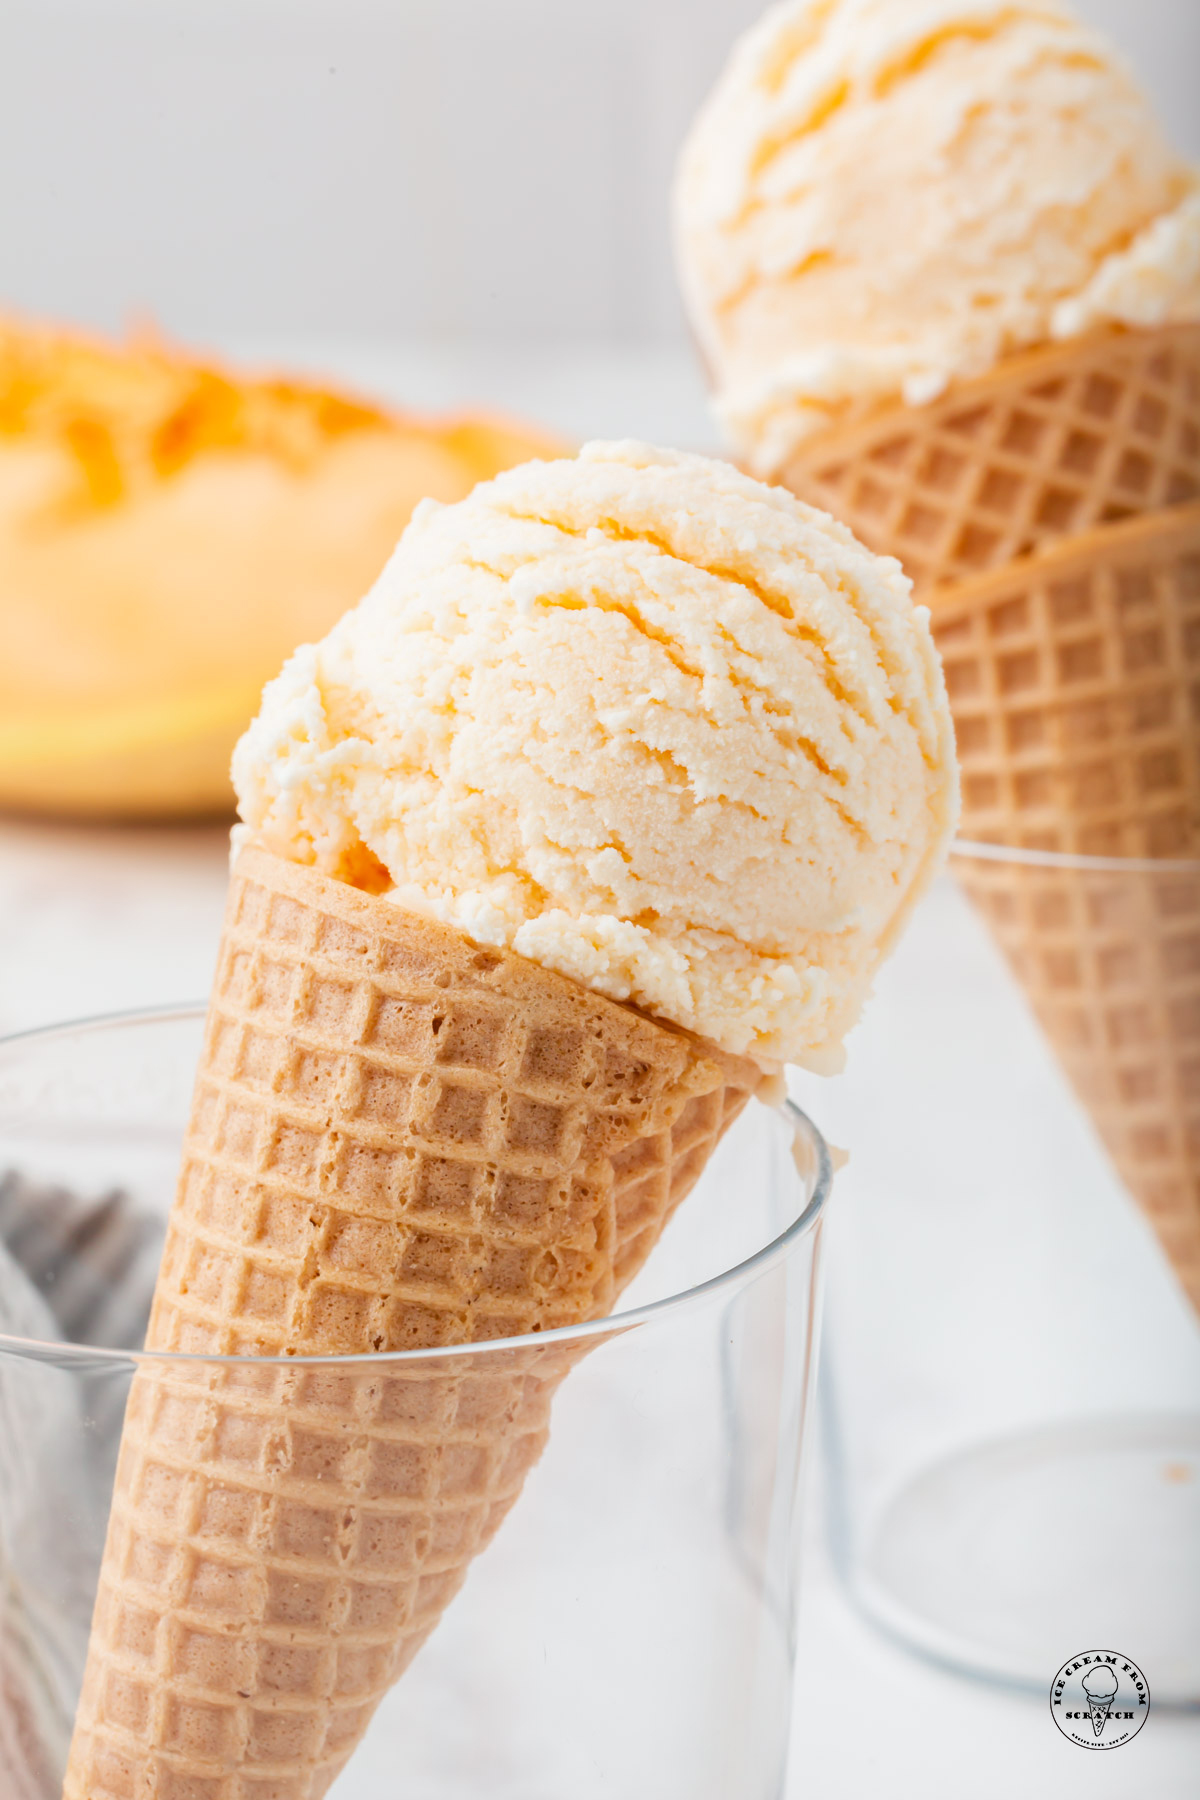 sugar cones topped with scoops of cantaloupe ice cream, propped up in glasses.